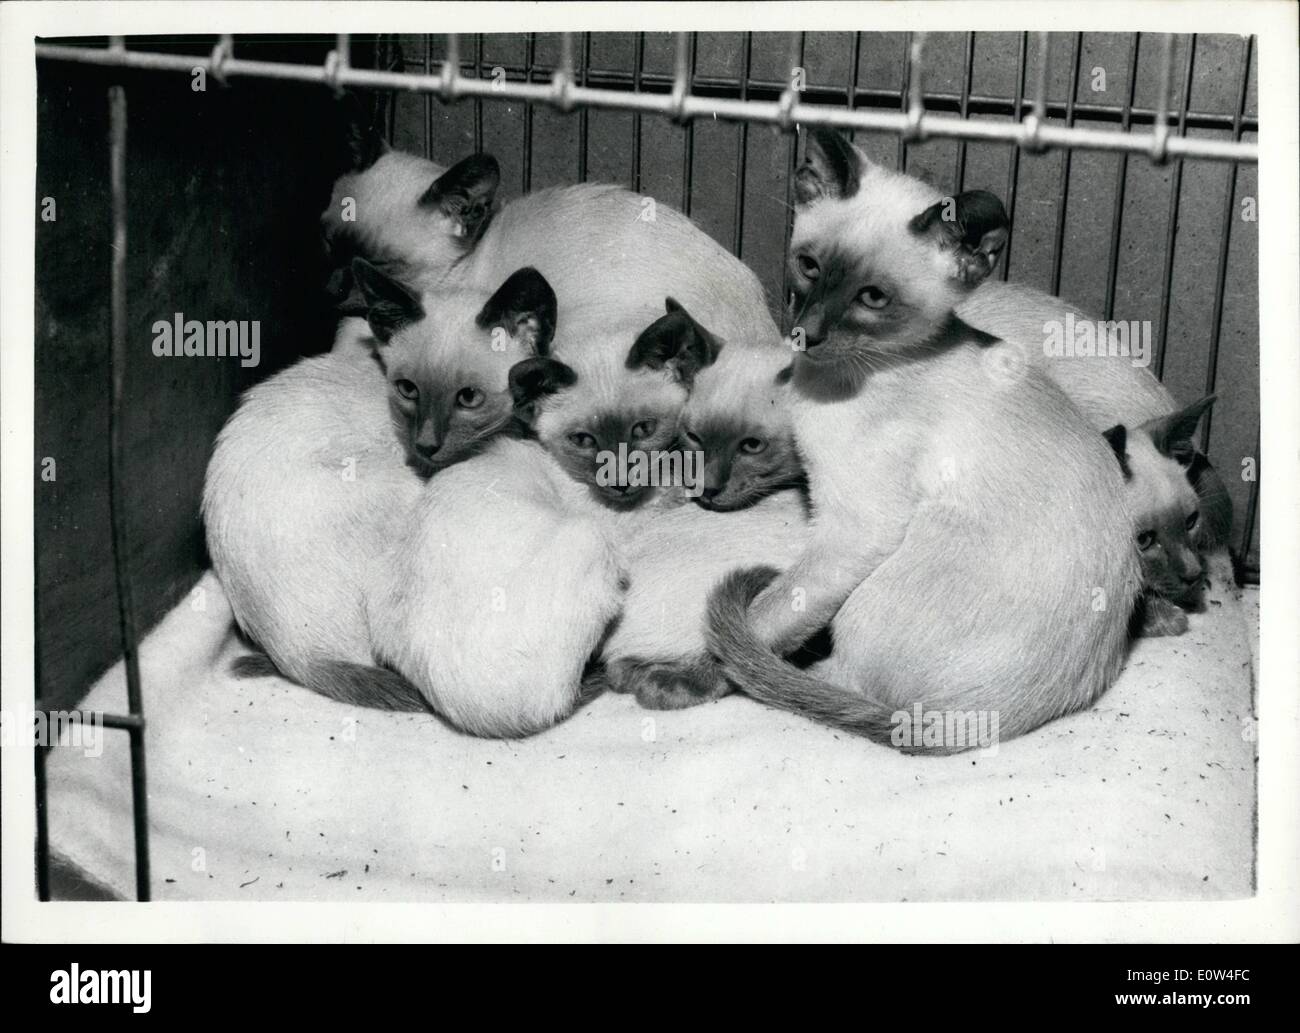 Apr. 04, 1961 - Siamese Cat Club Championship Show In London: The Championship Show of Siamese Cat Club - opened this morning at Seymour Hall, London. Phot Shows The first prize winning litter born to Champion Pristine Bandoola and Champion Kuala Azure Cynara - and owner by Mrs. Macalister of Rugby - on show this morning. Stock Photo